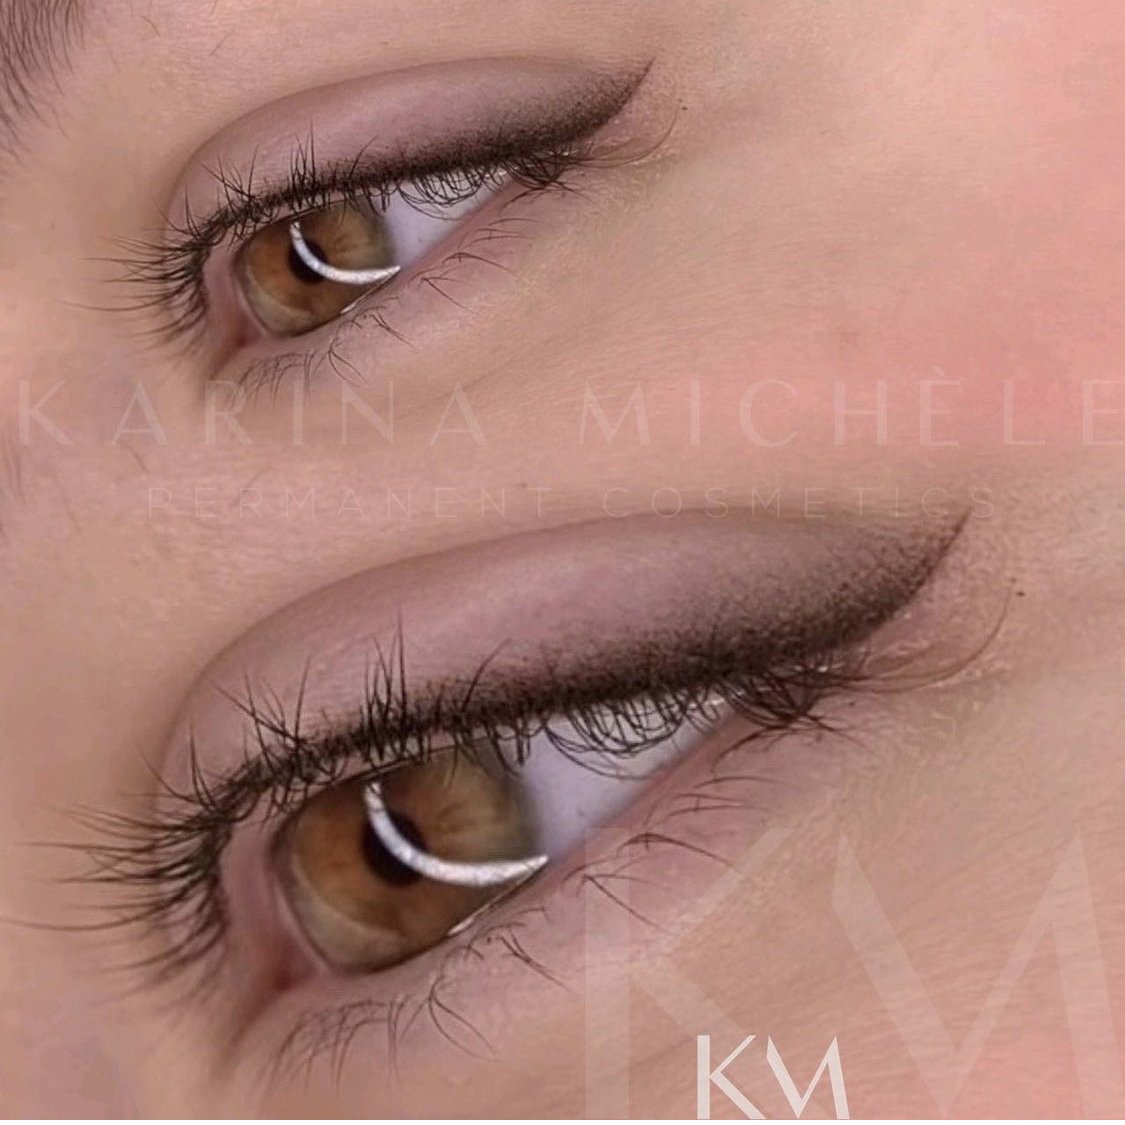 Advantages of permanent eyeliner tattoo - Strokes of Genius Microblading